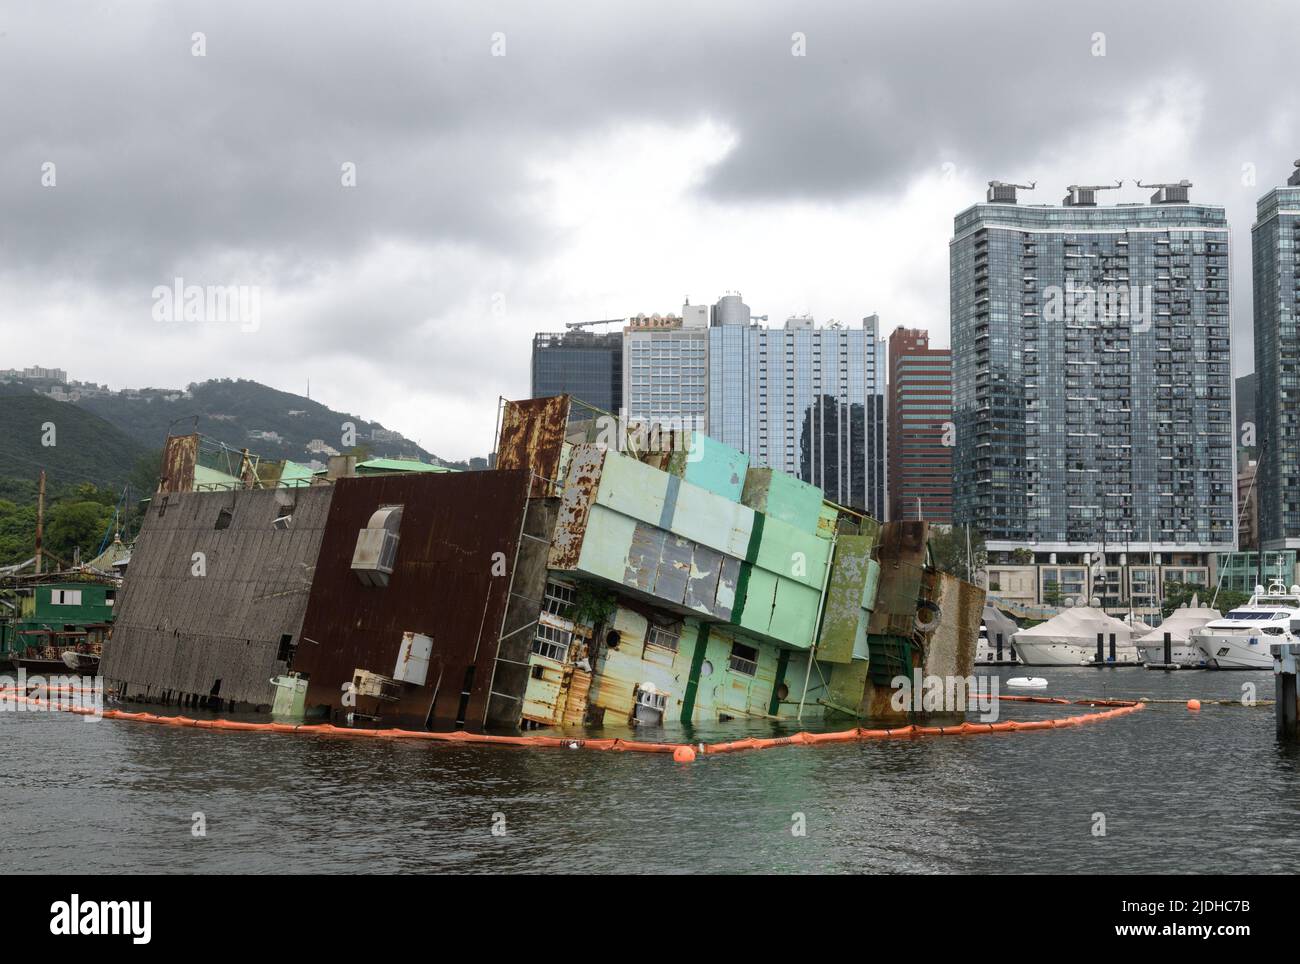 June 21, 2022, Hong Kong, Hong Kong SAR, China: Hong Kong, China:21 Jun, 2022. The Jumbo Floating restaurant capsized in the South China Sea while being towed to an undisclosed destination for repairs. Parts os the kitchen remain while one has listed.Jumbo Kingdom çå¯¶çŽ‹åœ‹ consisted of the Jumbo Floating Restaurant çå¯¶æµ·é®®èˆ«) and the adjacent Tai Pak Floating Restaurant å¤ªç™½æµ·é®®èˆ« which were renowned tourist attractions in Aberdeen South Typhoon Shelter, within Hong Kong's Aberdeen Harbour. (Credit Image: © Jayne Russell/ZUMA Press Wire) Stock Photo